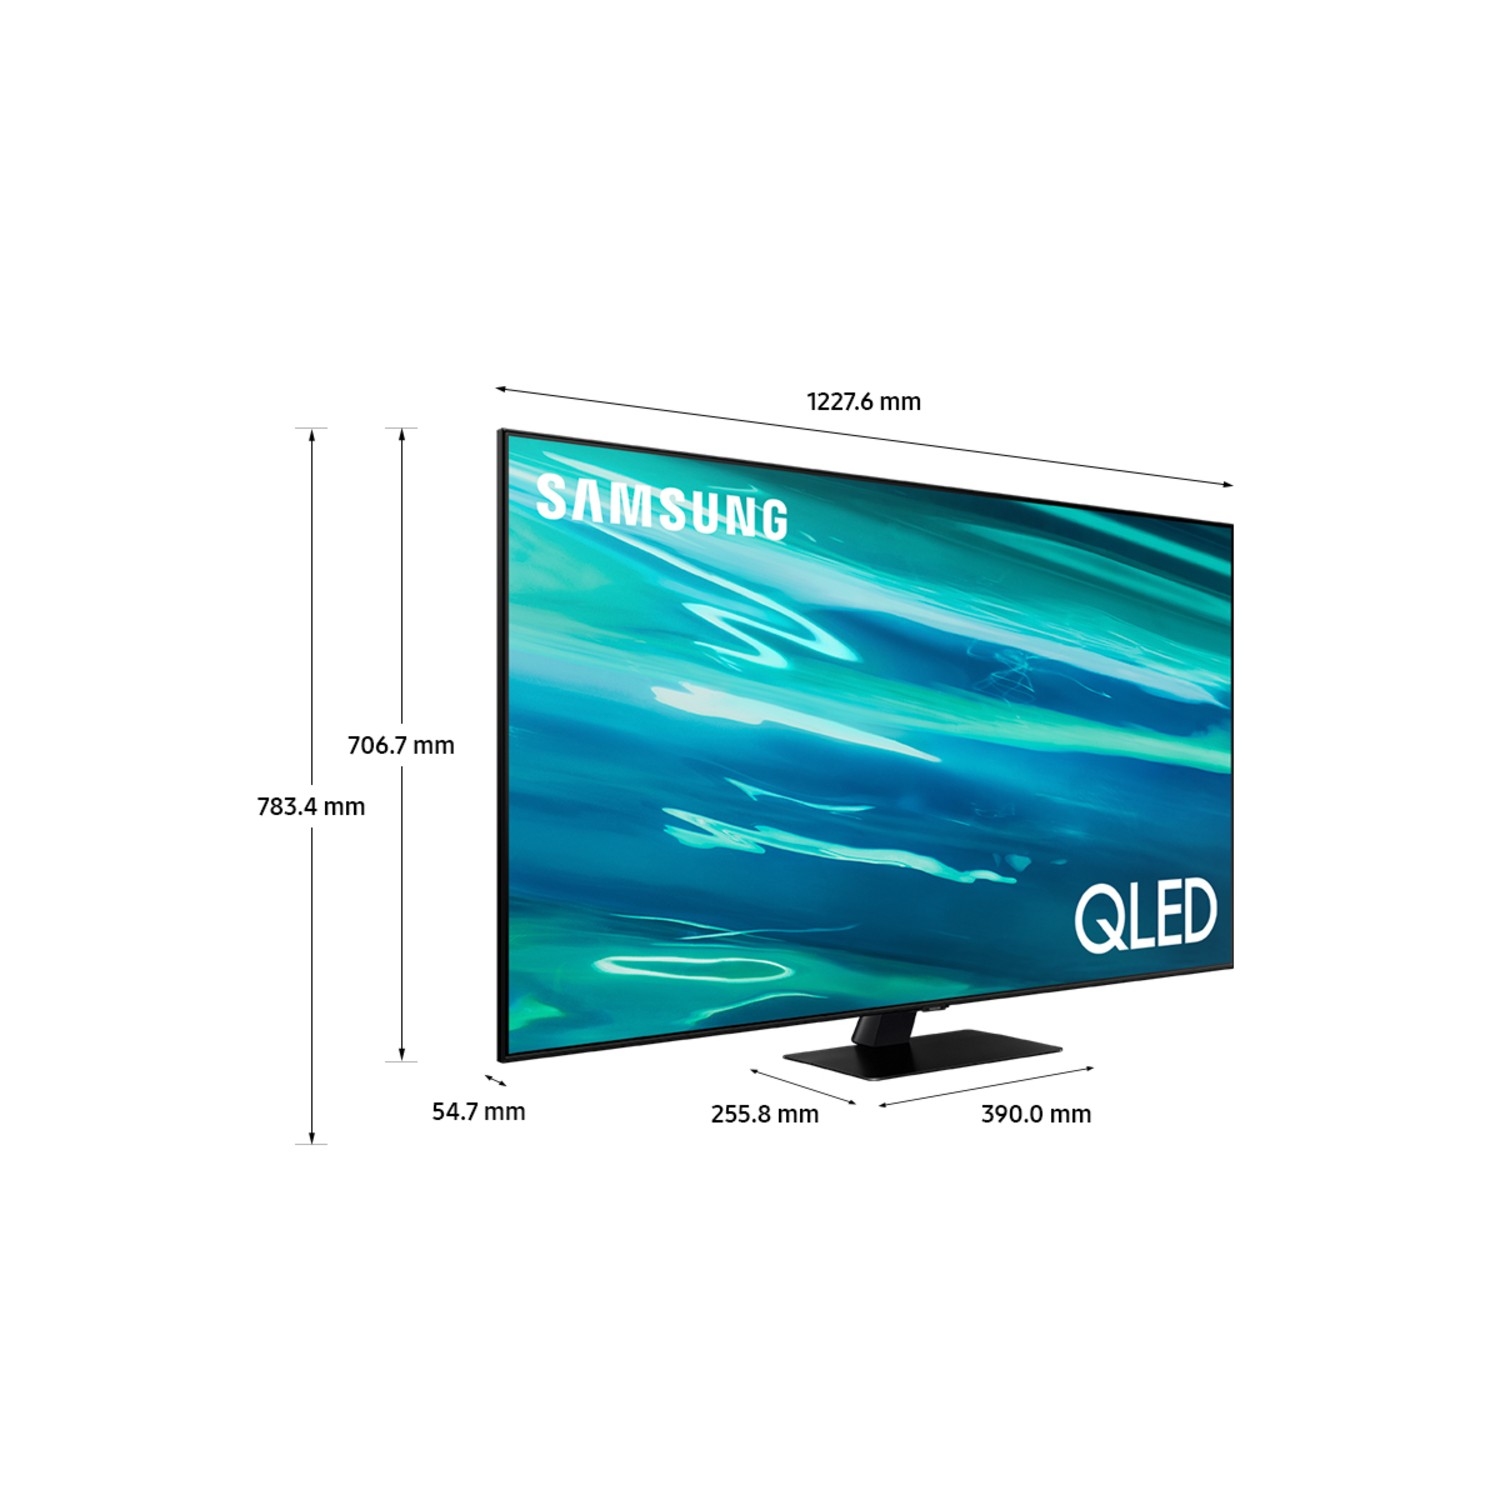 Samsung QE55Q80AATXXU 55" 4K QLED Smart TV Quantum HDR 1500 powered by HDR10+ with object tracking and AI sound - 1